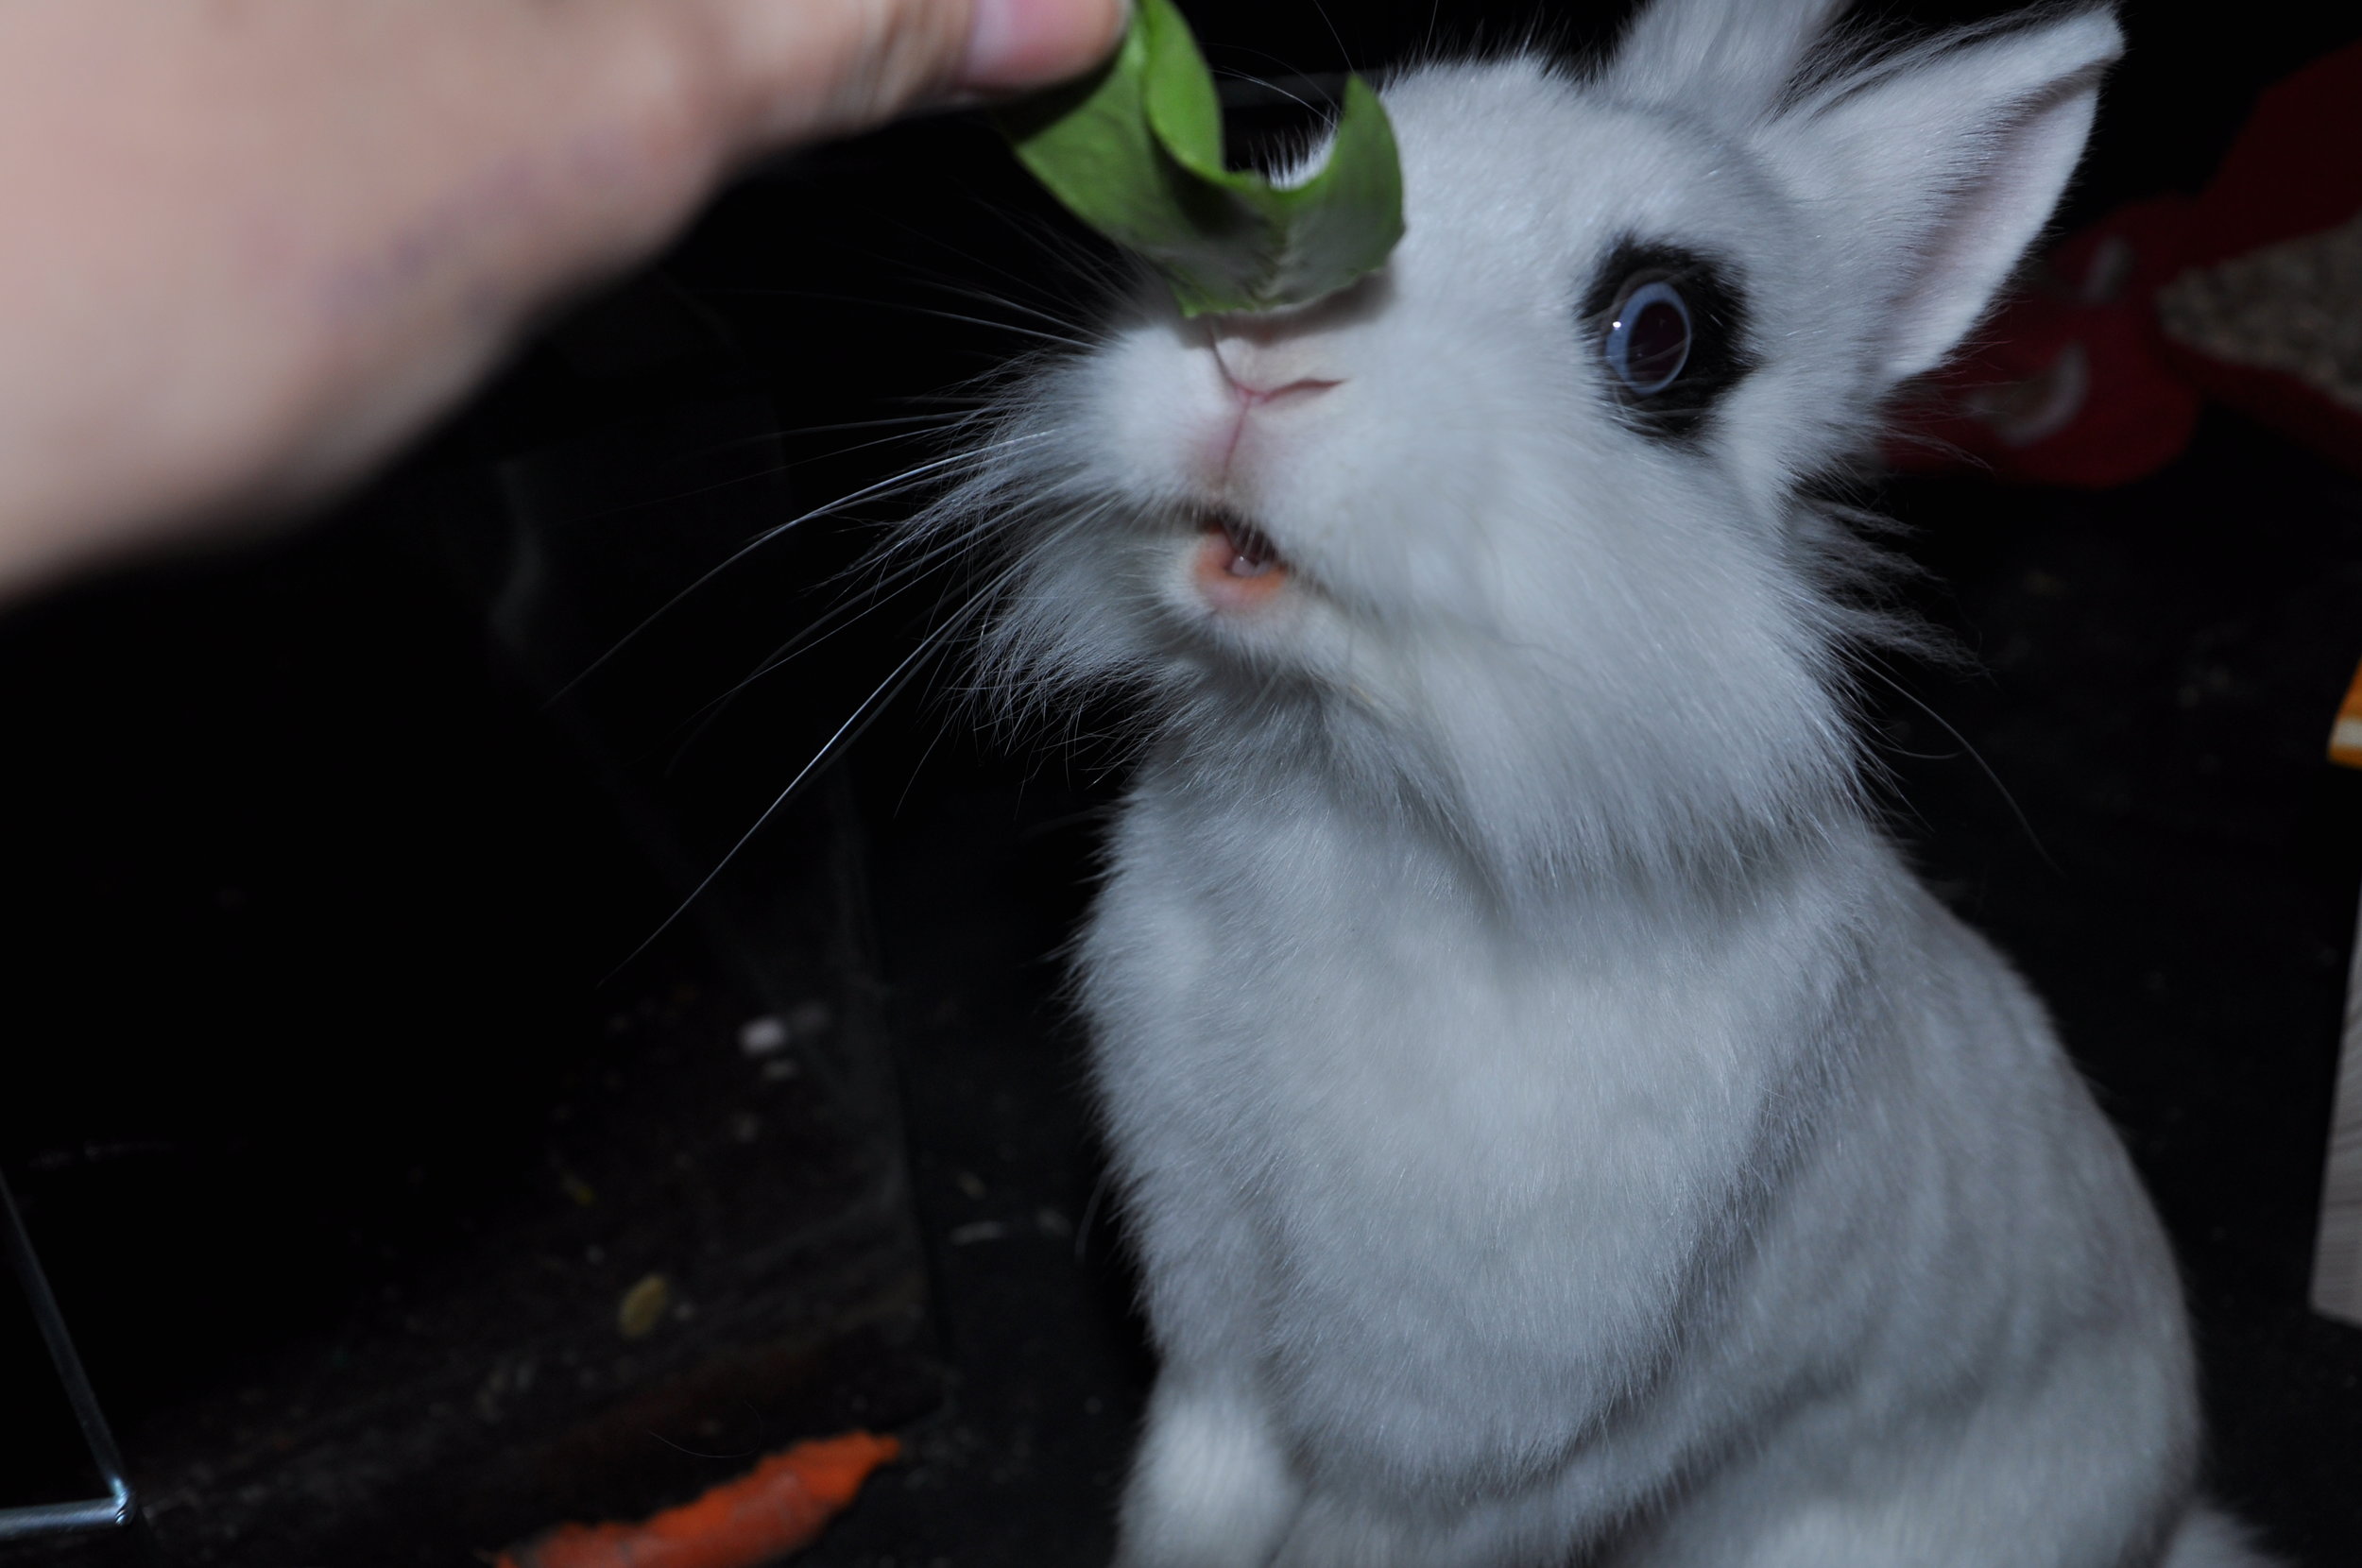 Bunny Will Happily Accept His Human's Offerings of Greens and Strawberries 1